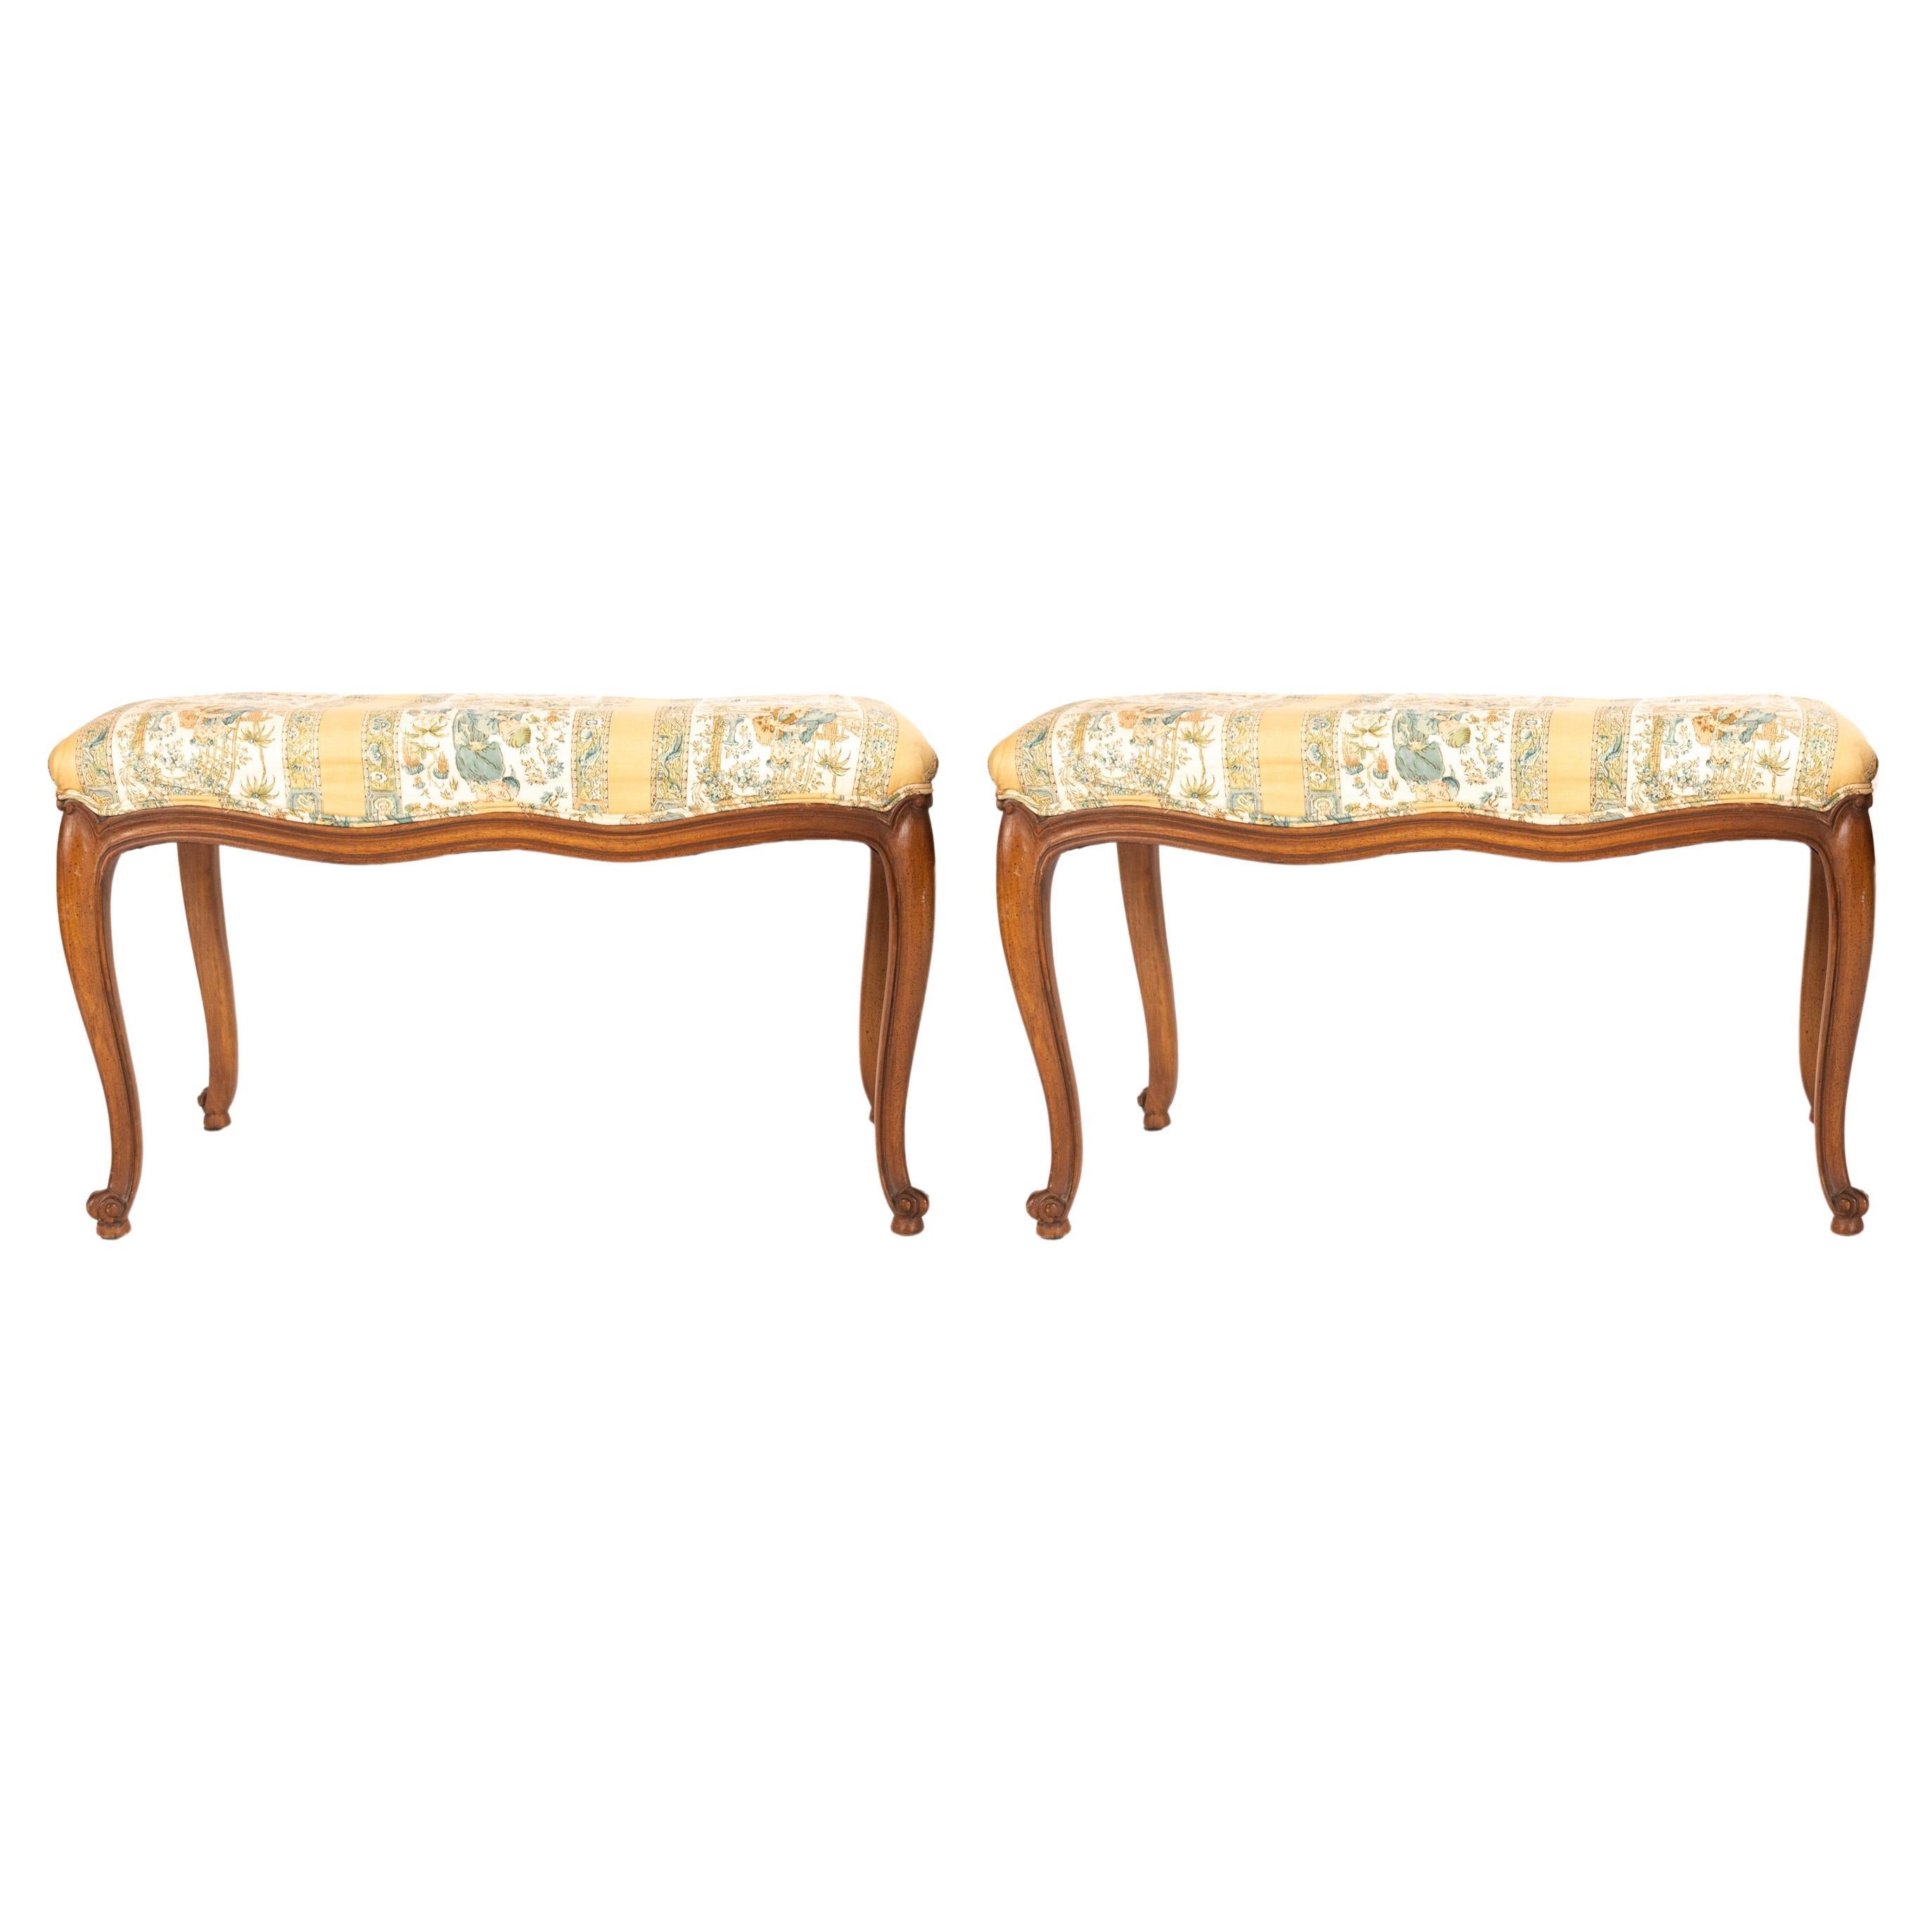 Pair of 19th Century Louis XVth-Style Fruitwood Benches with Upholstered Seats For Sale